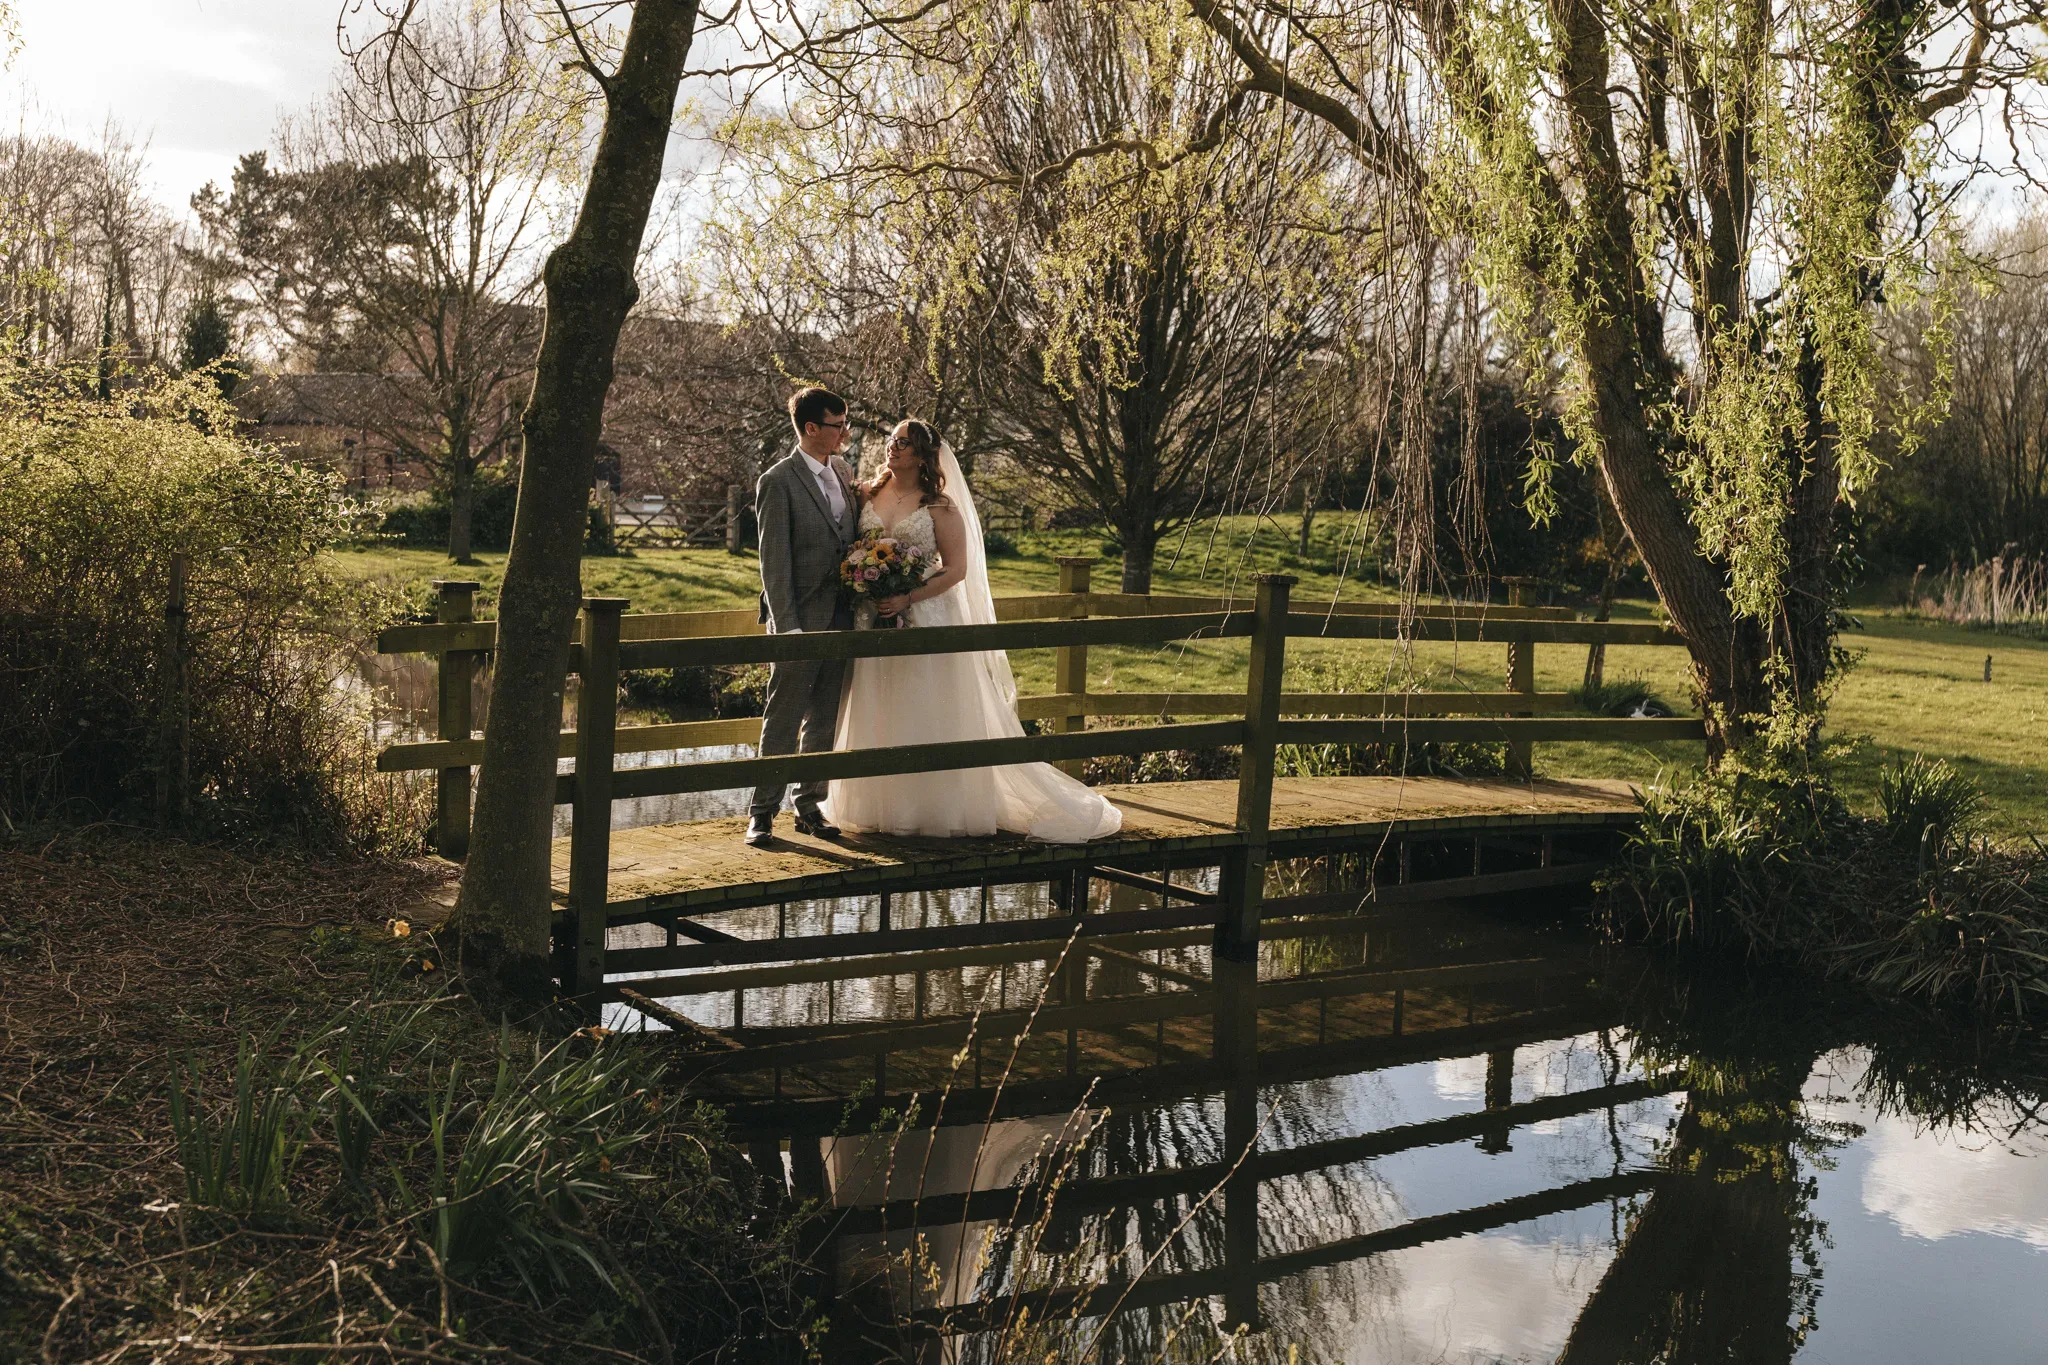 A newlywed couple shares a tender moment on a rustic wooden bridge amidst a serene, sun-dappled landscape, reflecting a picturesque countryside romance.